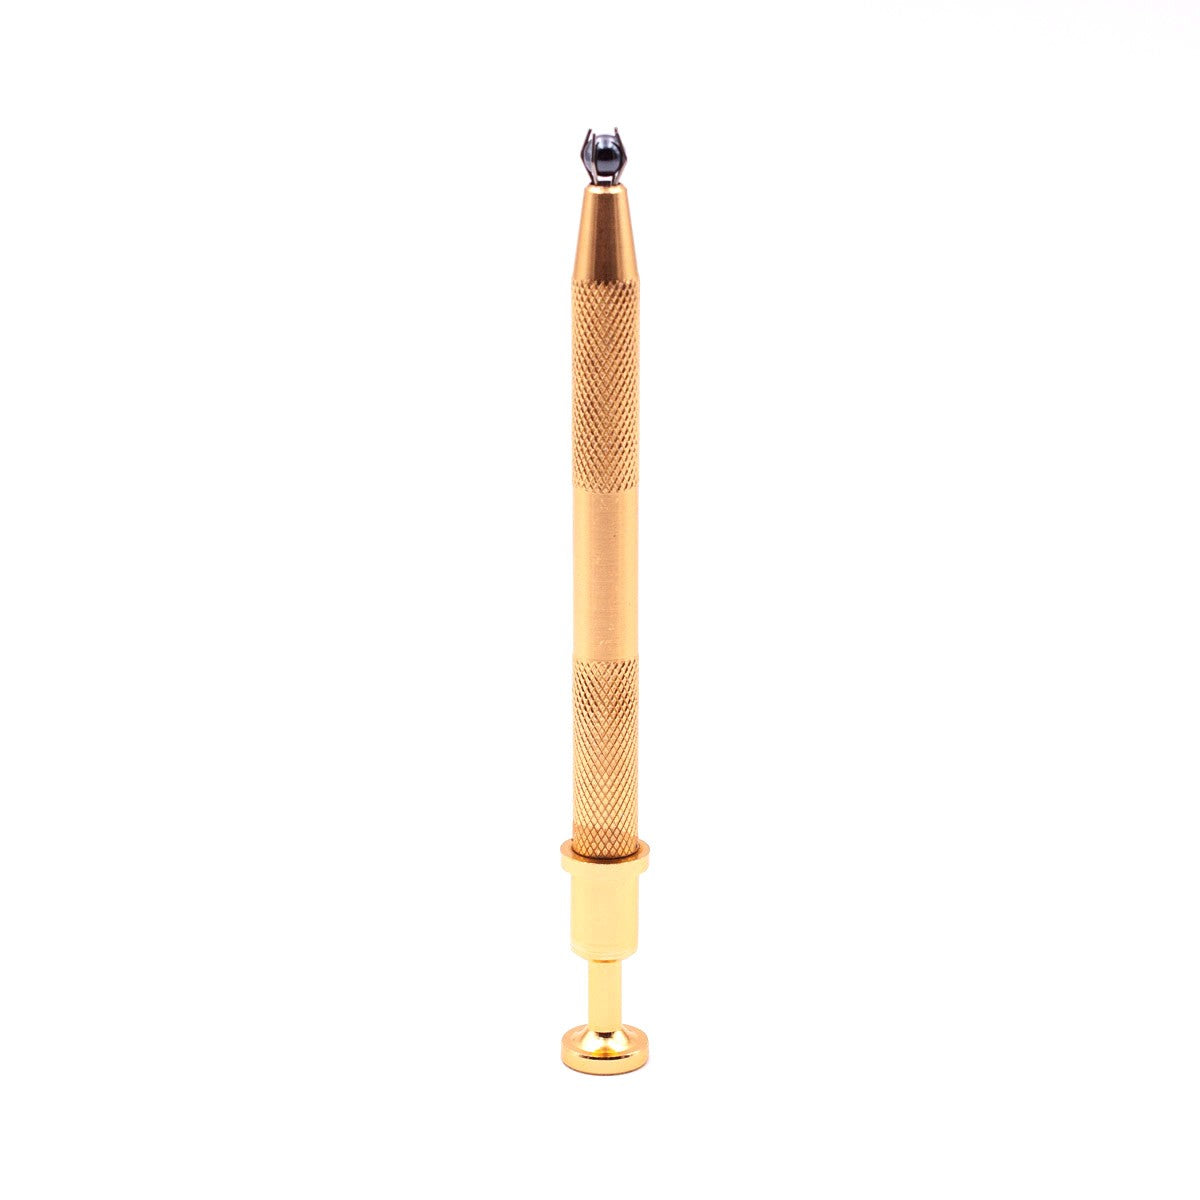 The Stash Shack Gold Pearl Grabber Tool for Concentrates, Front View on Seamless White Background